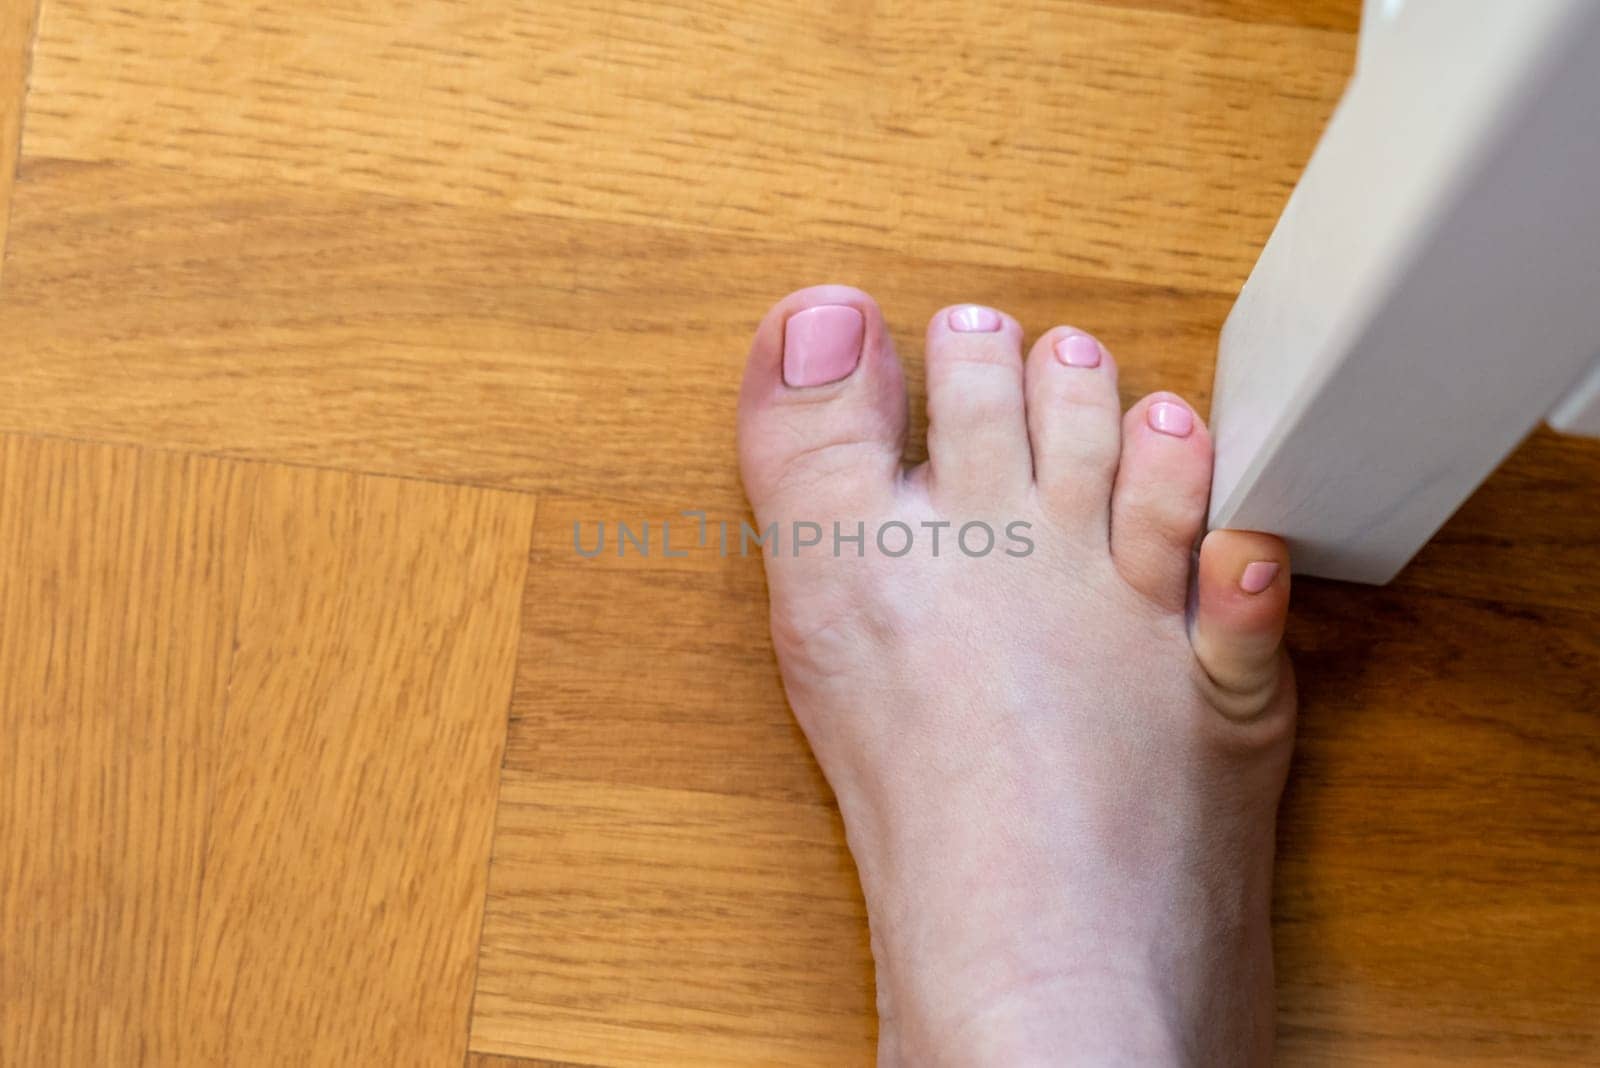 Woman hit furniture with the little toe. Accident at home. Injury of foot little finger